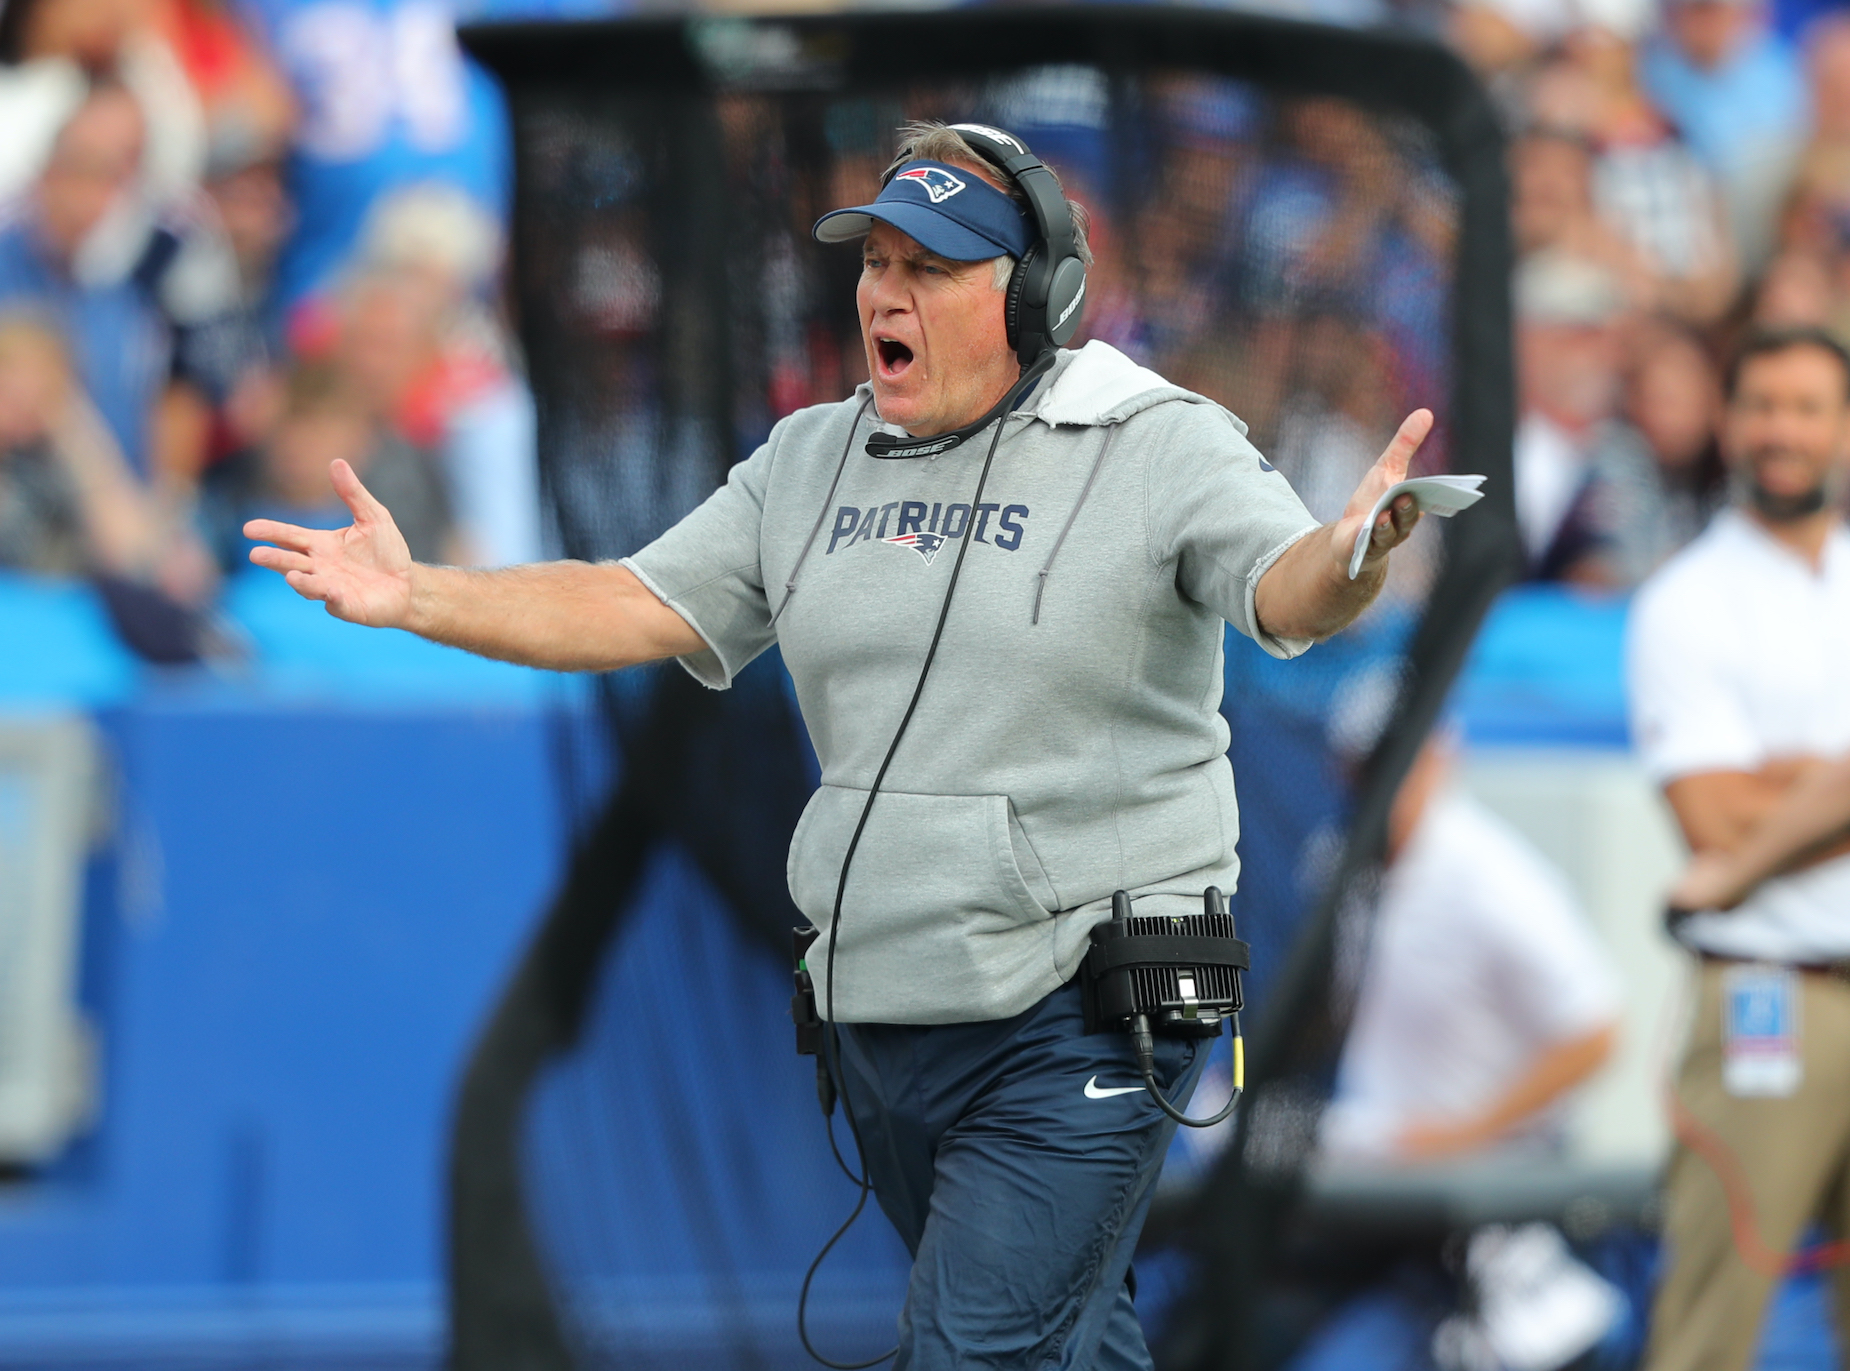 New England Patriots coach Bill Belichick reacts on the sidelines during a 2019 NFL game.